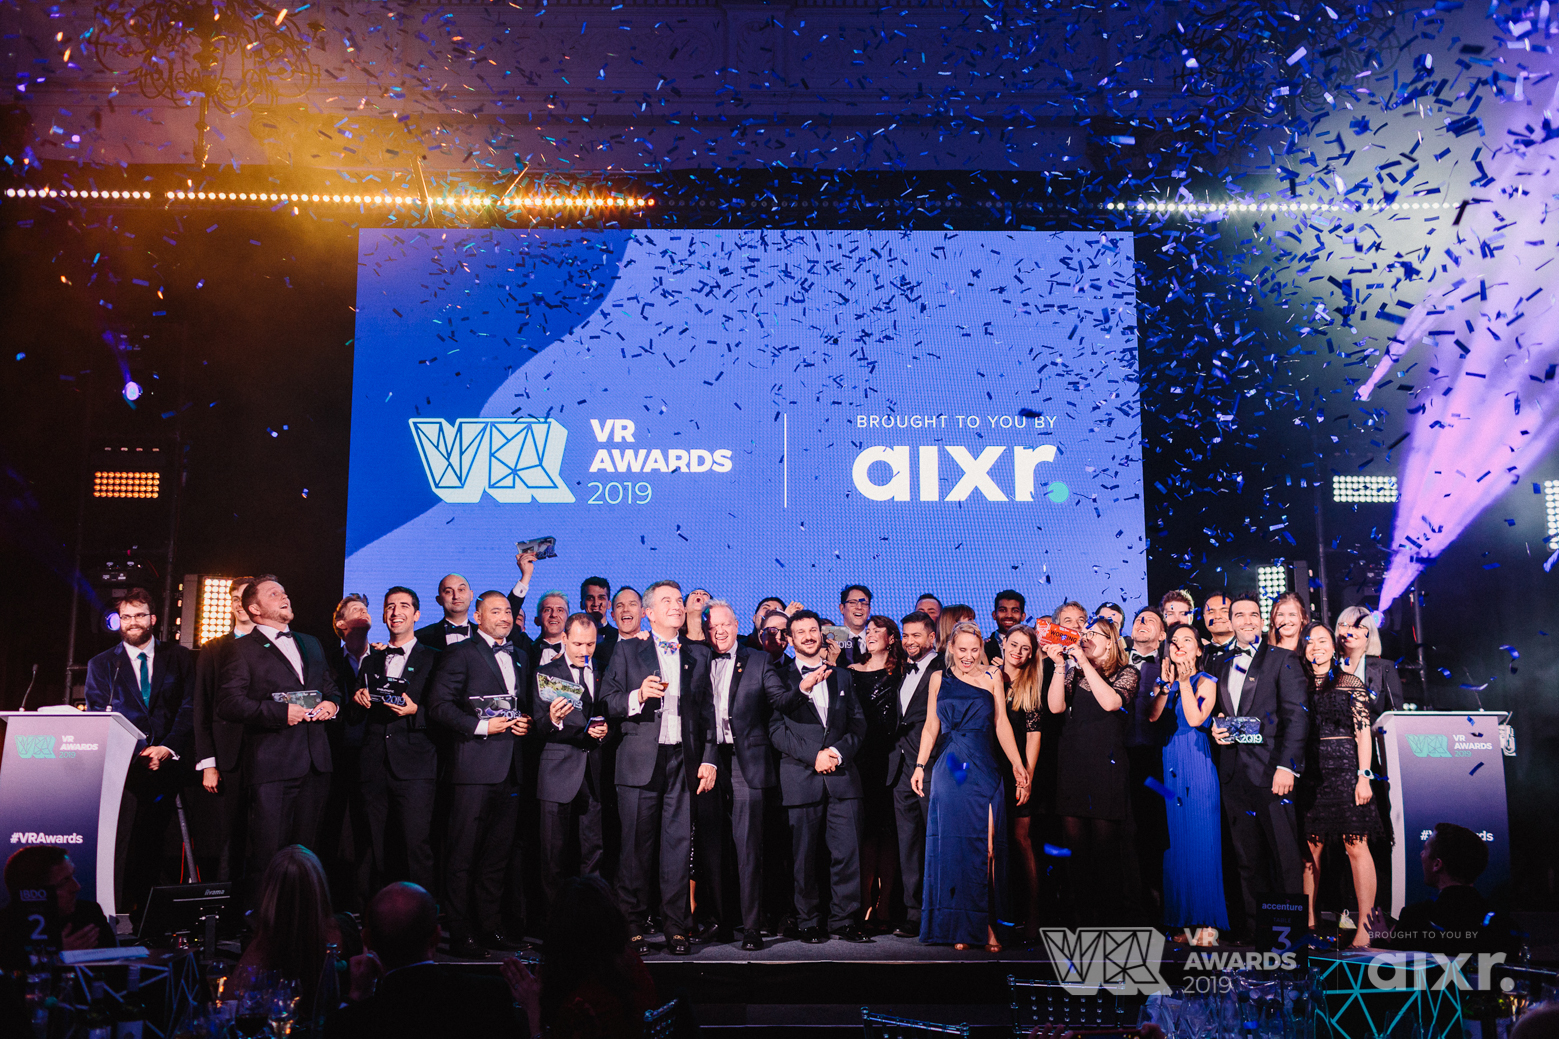 Finalists Announced for The Fourth International VR Awards AIXR